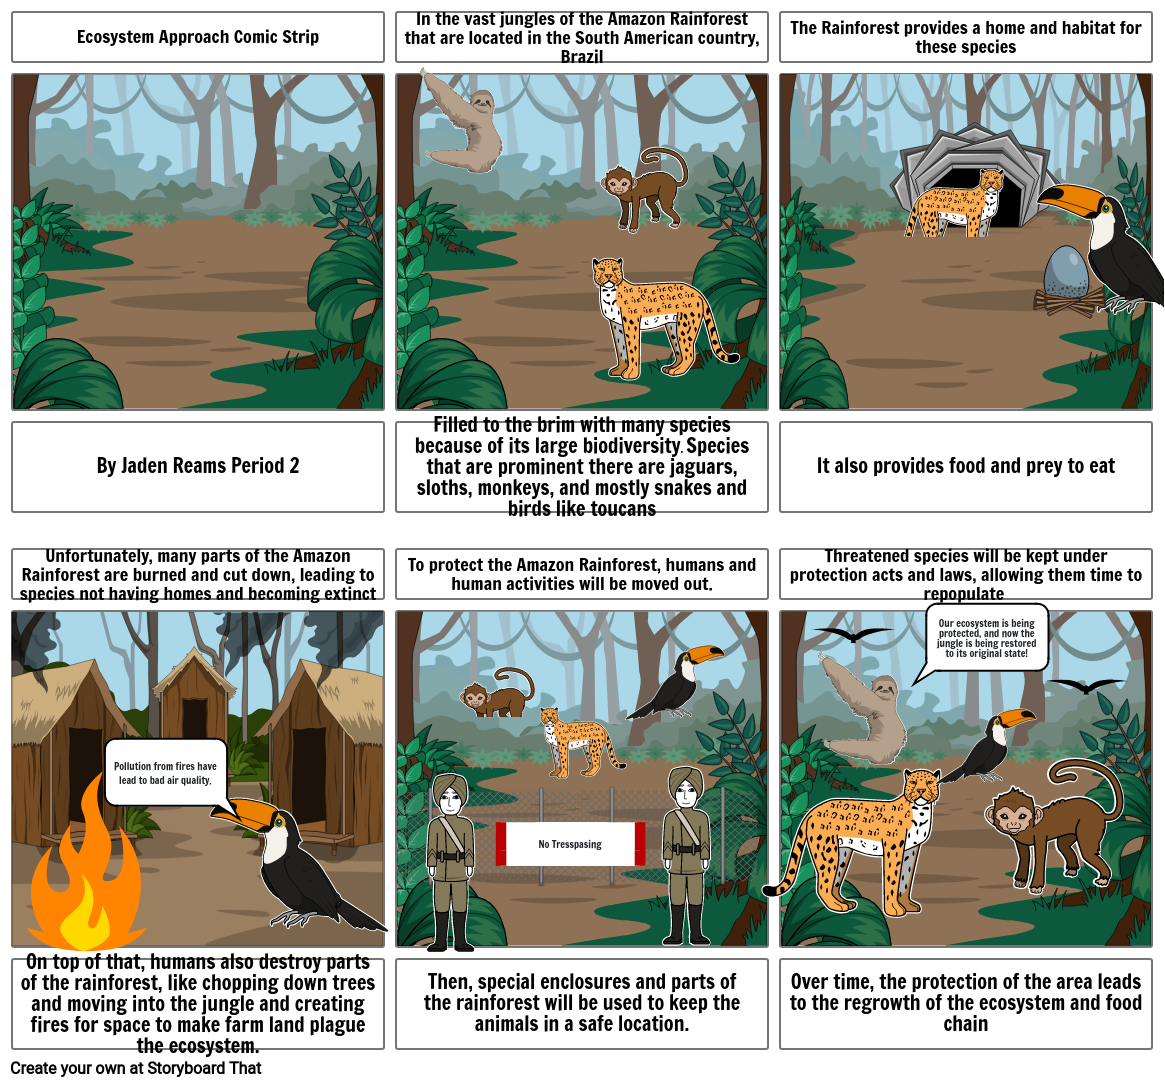 Comic Strip Science Project Part 1 Storyboard by e11ee67c